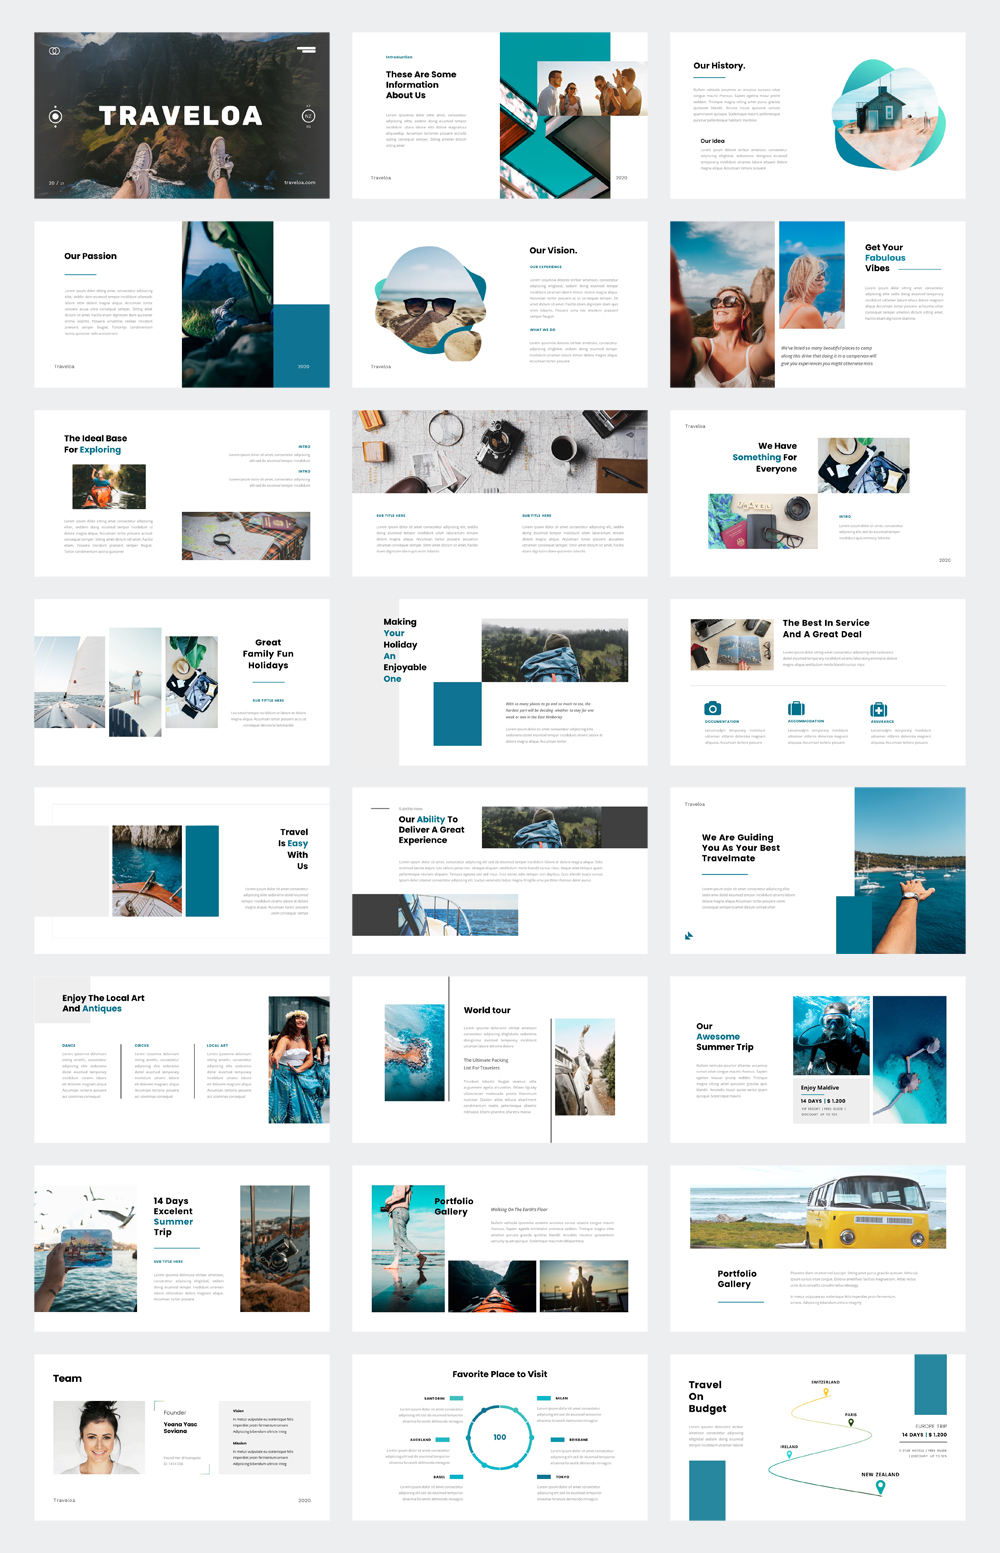 Travel PowerPoint Template